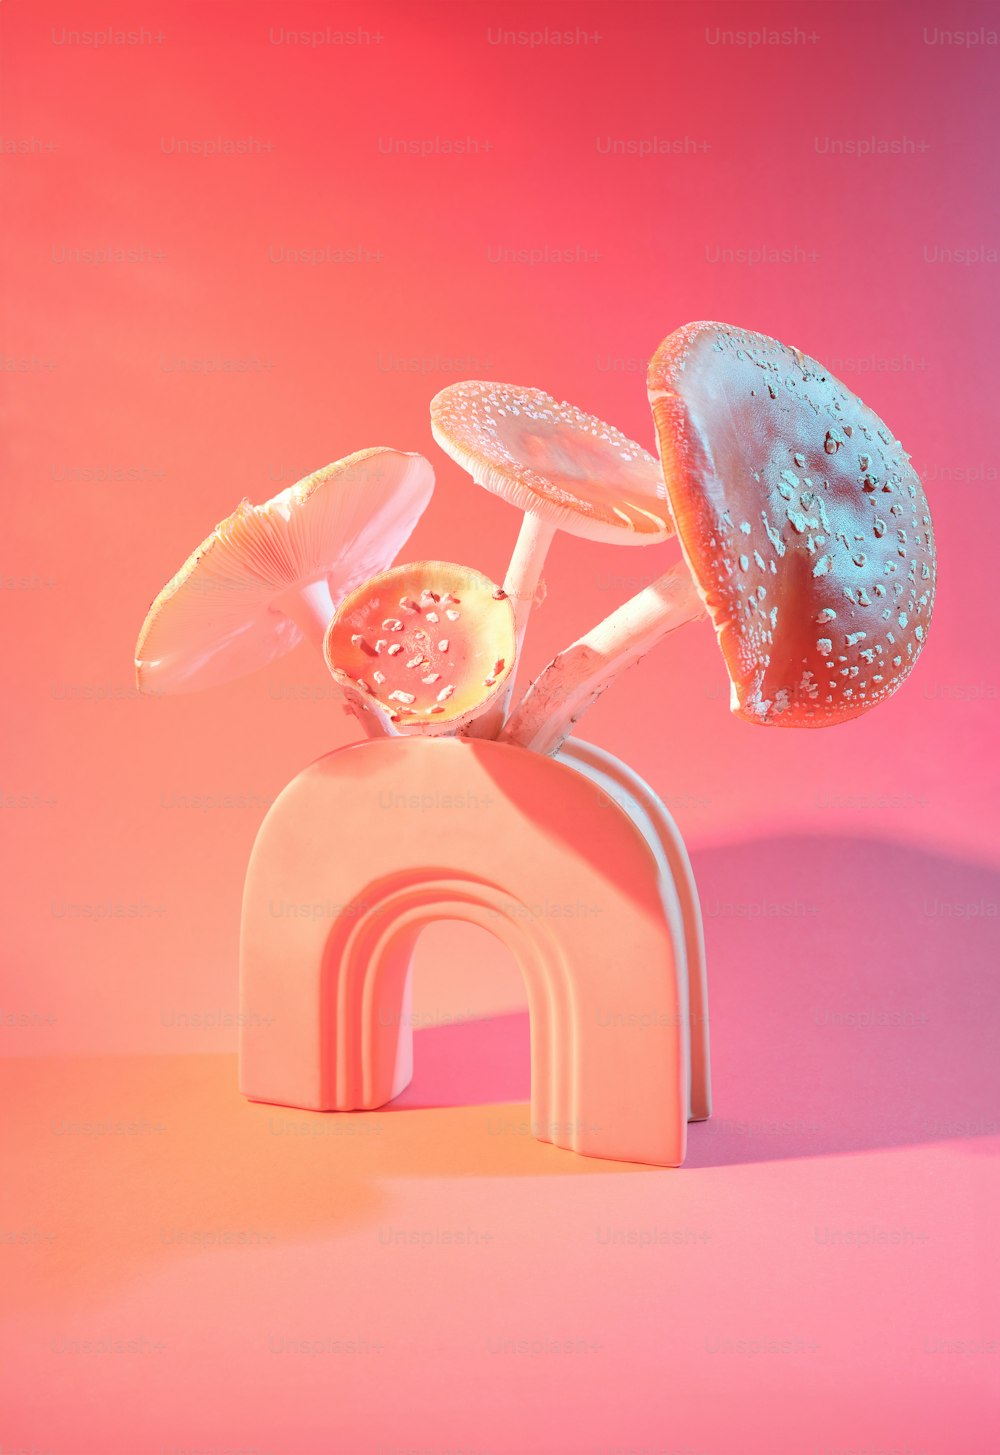 a sculpture of mushrooms on a pink background